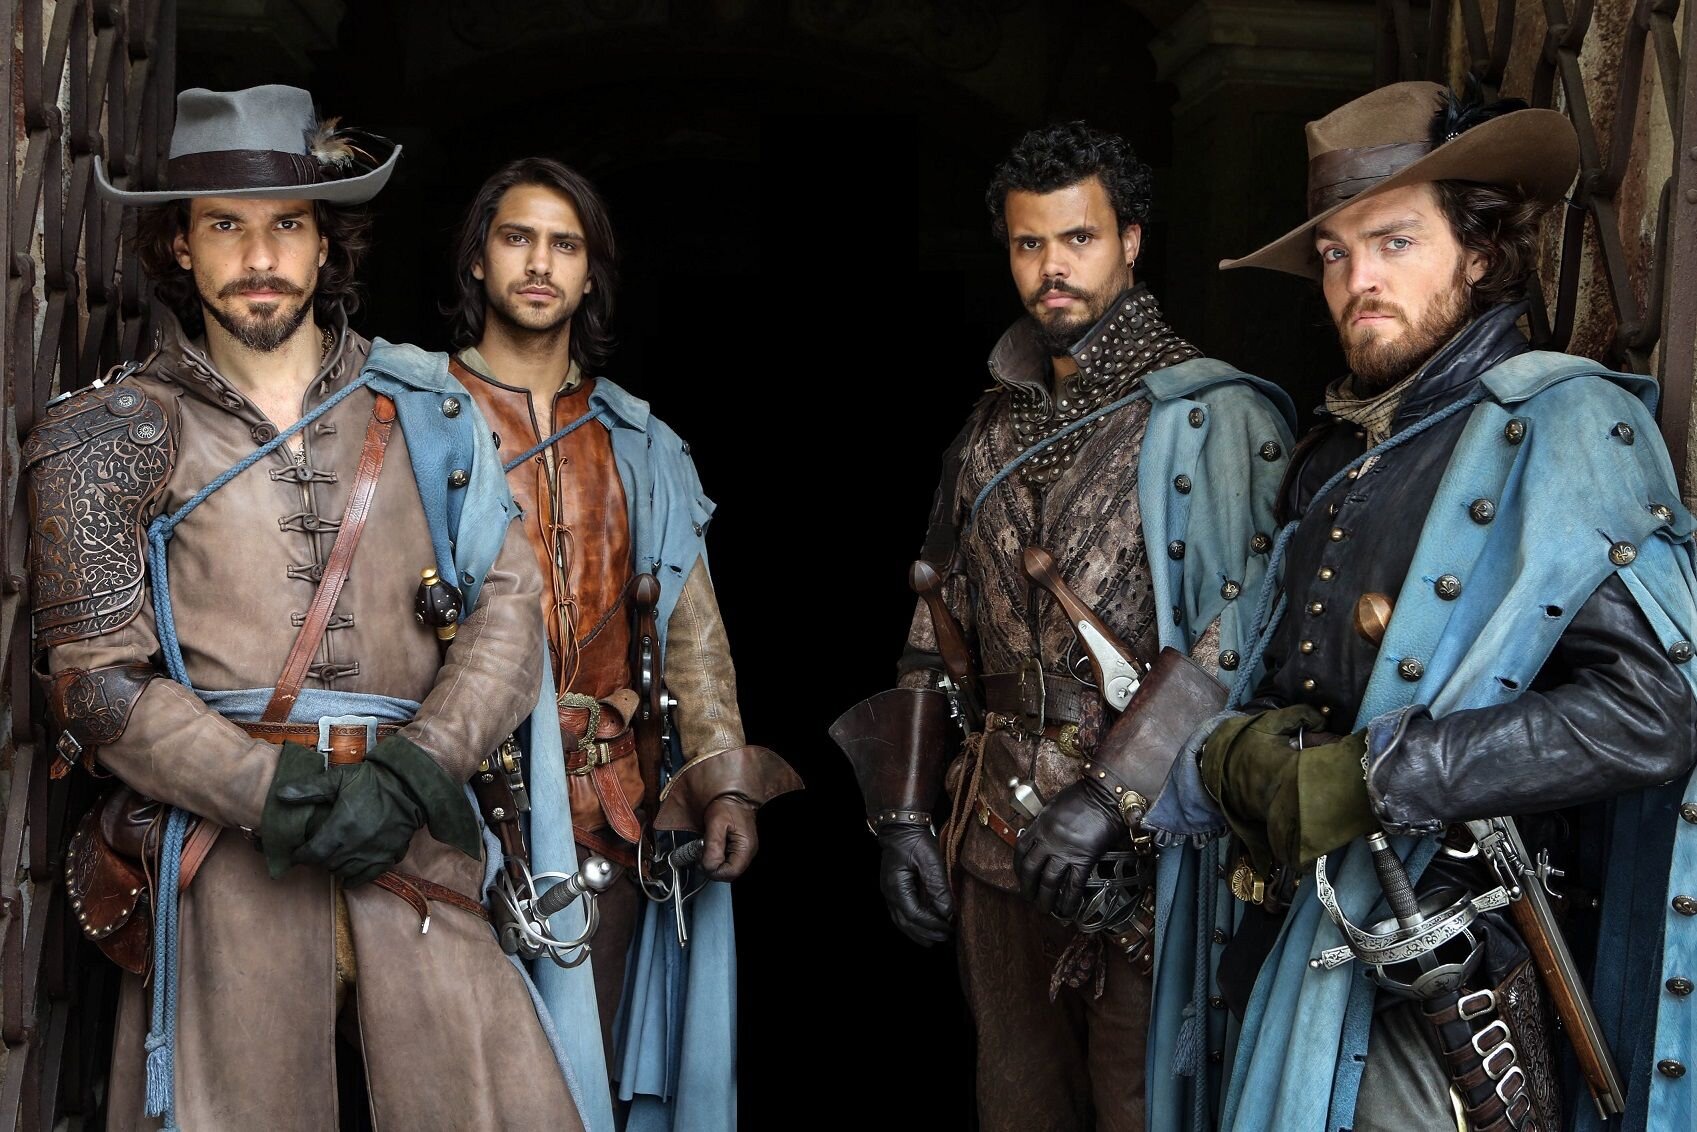 Why "The Musketeers" Is The Greatest Period Drama To Exist